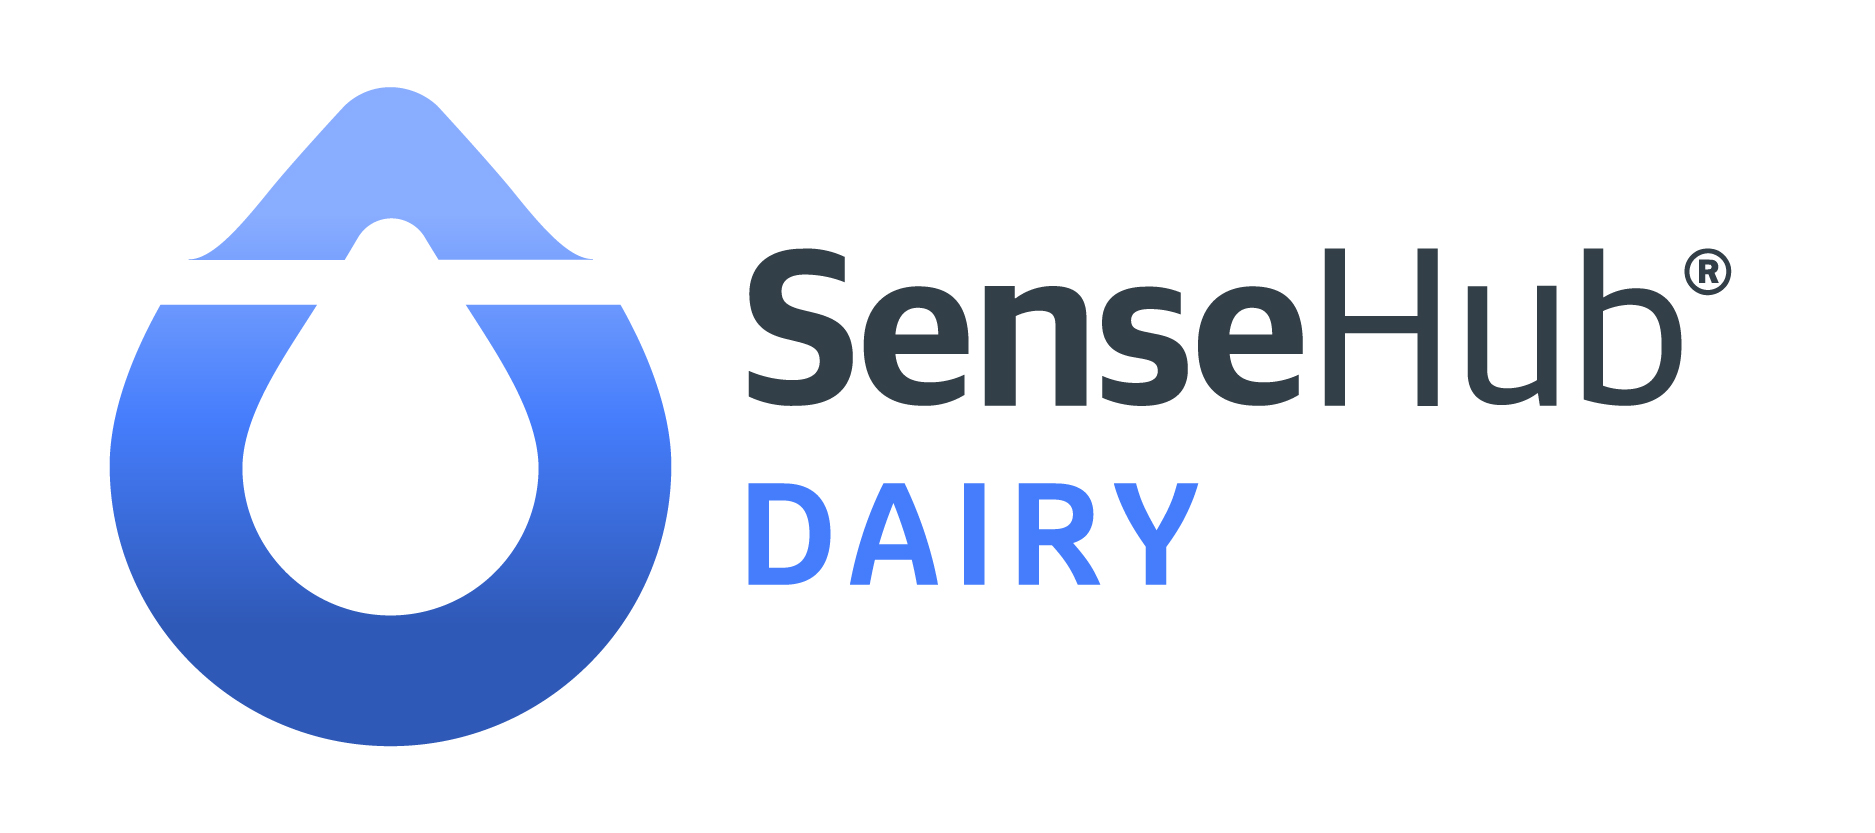 SenseHubDairy a tool for dairy poducers.